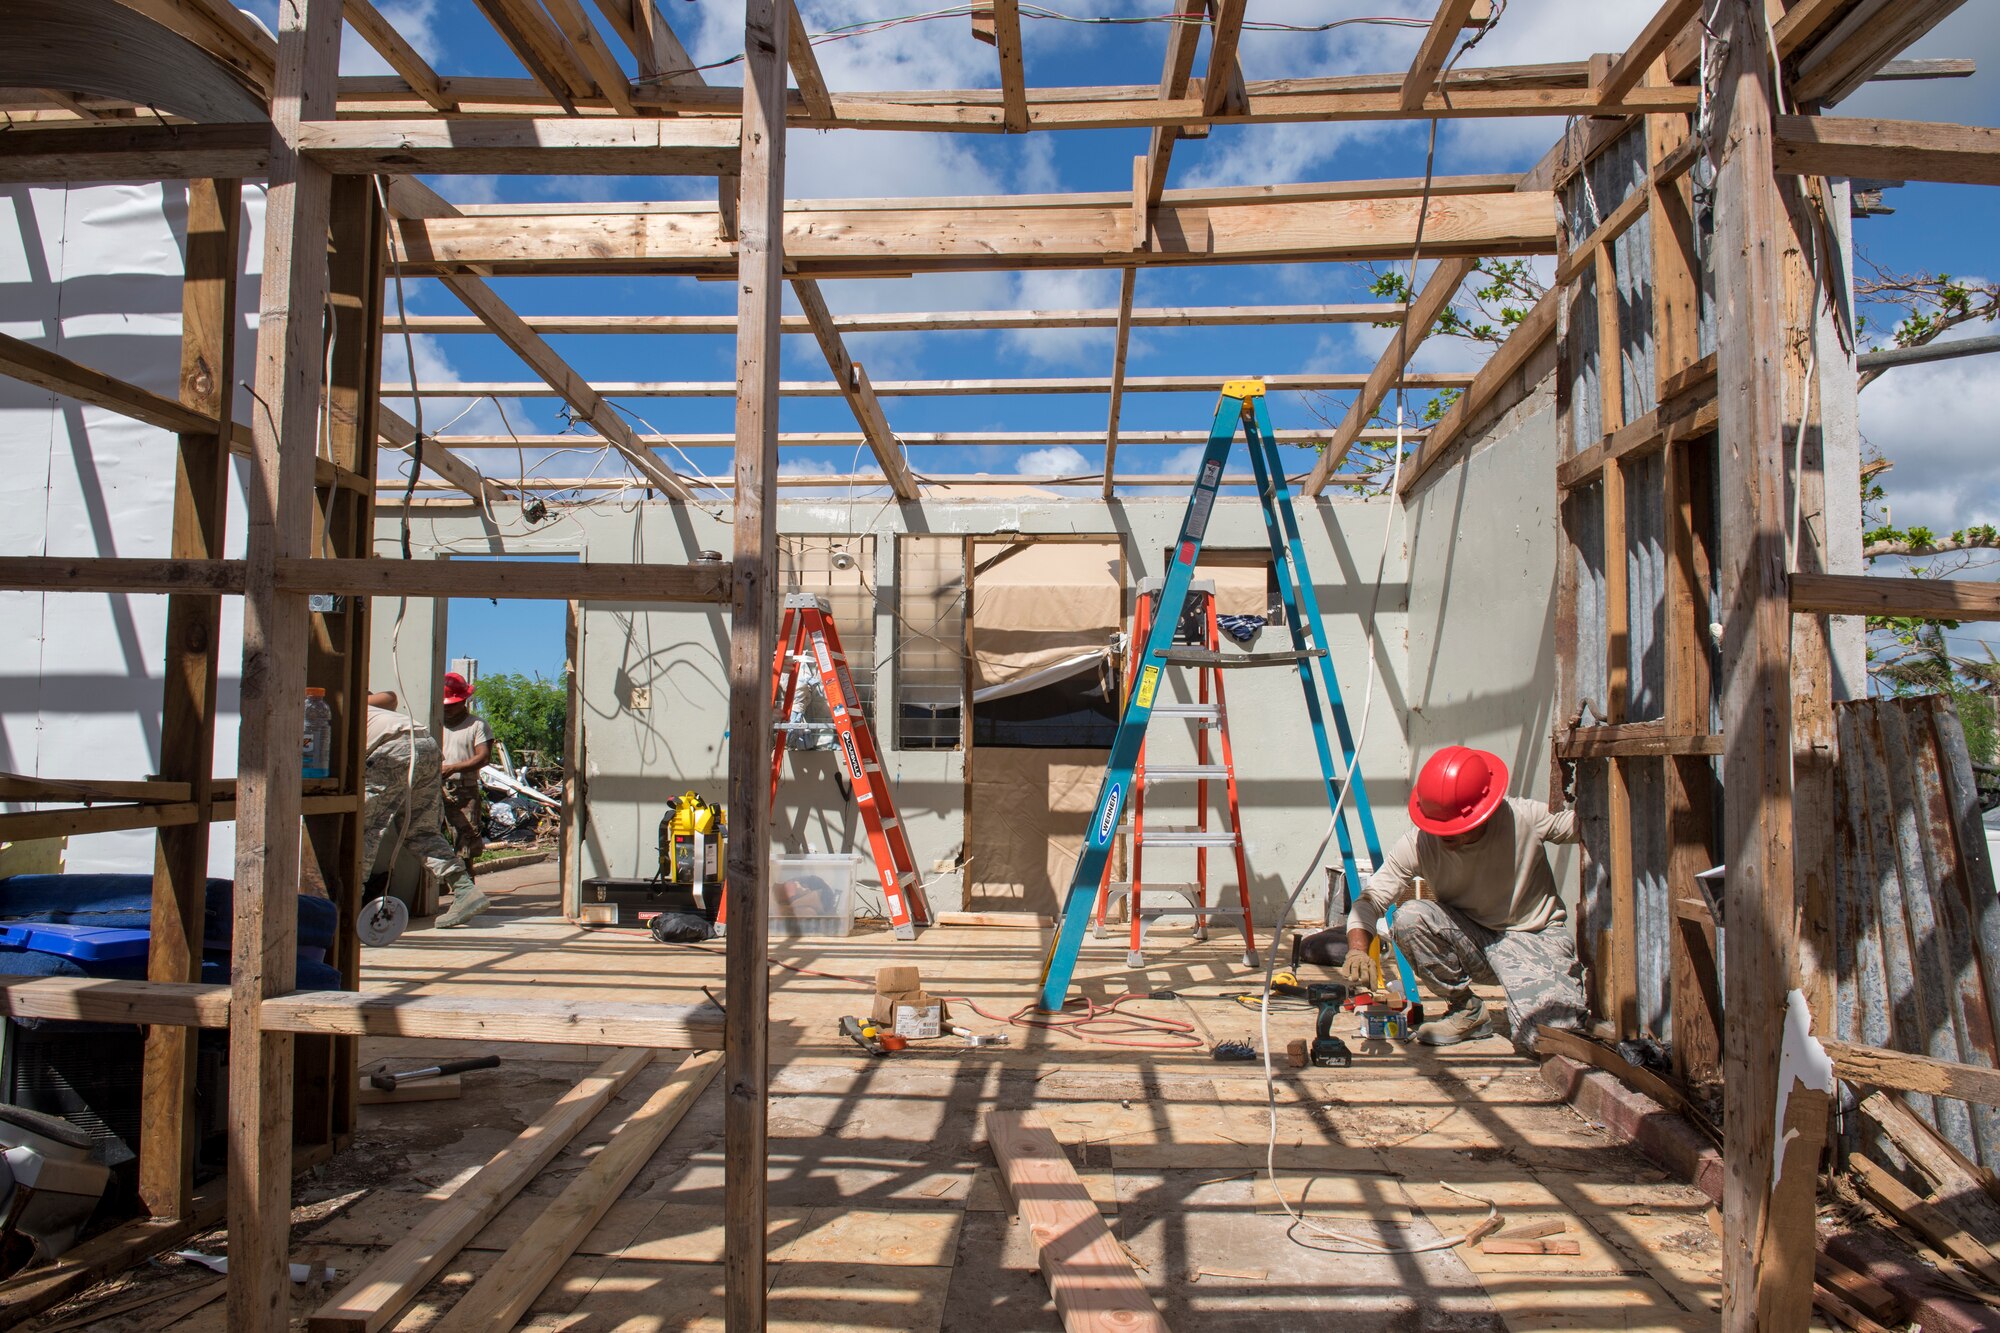 Tech. Sgt. Andy Quintanilla, 254th Rapid Engineer Deployable Heavy Operational Repair Squadron Engineers structural craftsman, builds a roof for a home in the village of Koblerville, Saipan, Commonwealth of the Northern Mariana Islands, Nov. 20, 2018, as part of the roof building in support of the Super Typhoon Yutu relief efforts.